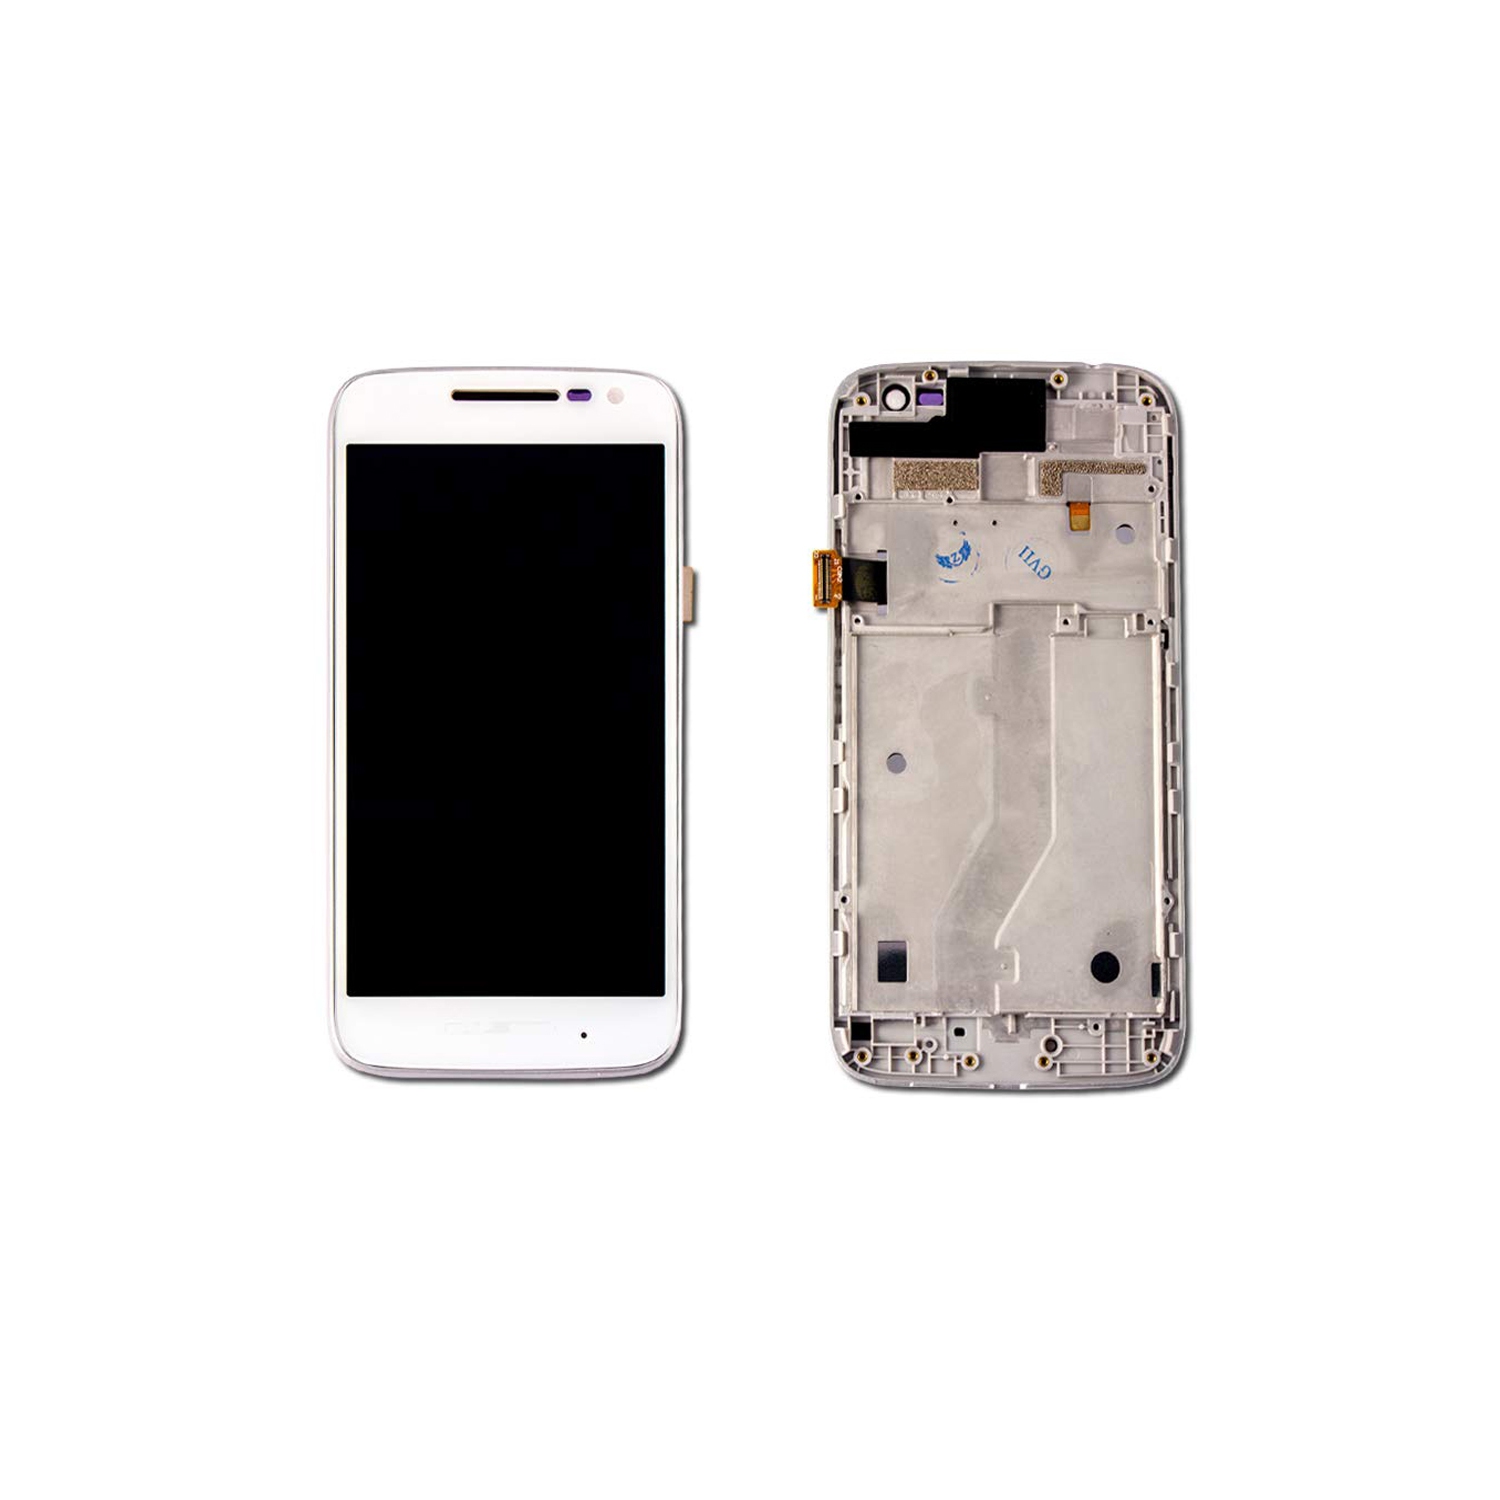 Replacement LCD Display Touch Screen Digitizer Assembly With Frame Compatible With Motorola Moto G4 Play - White